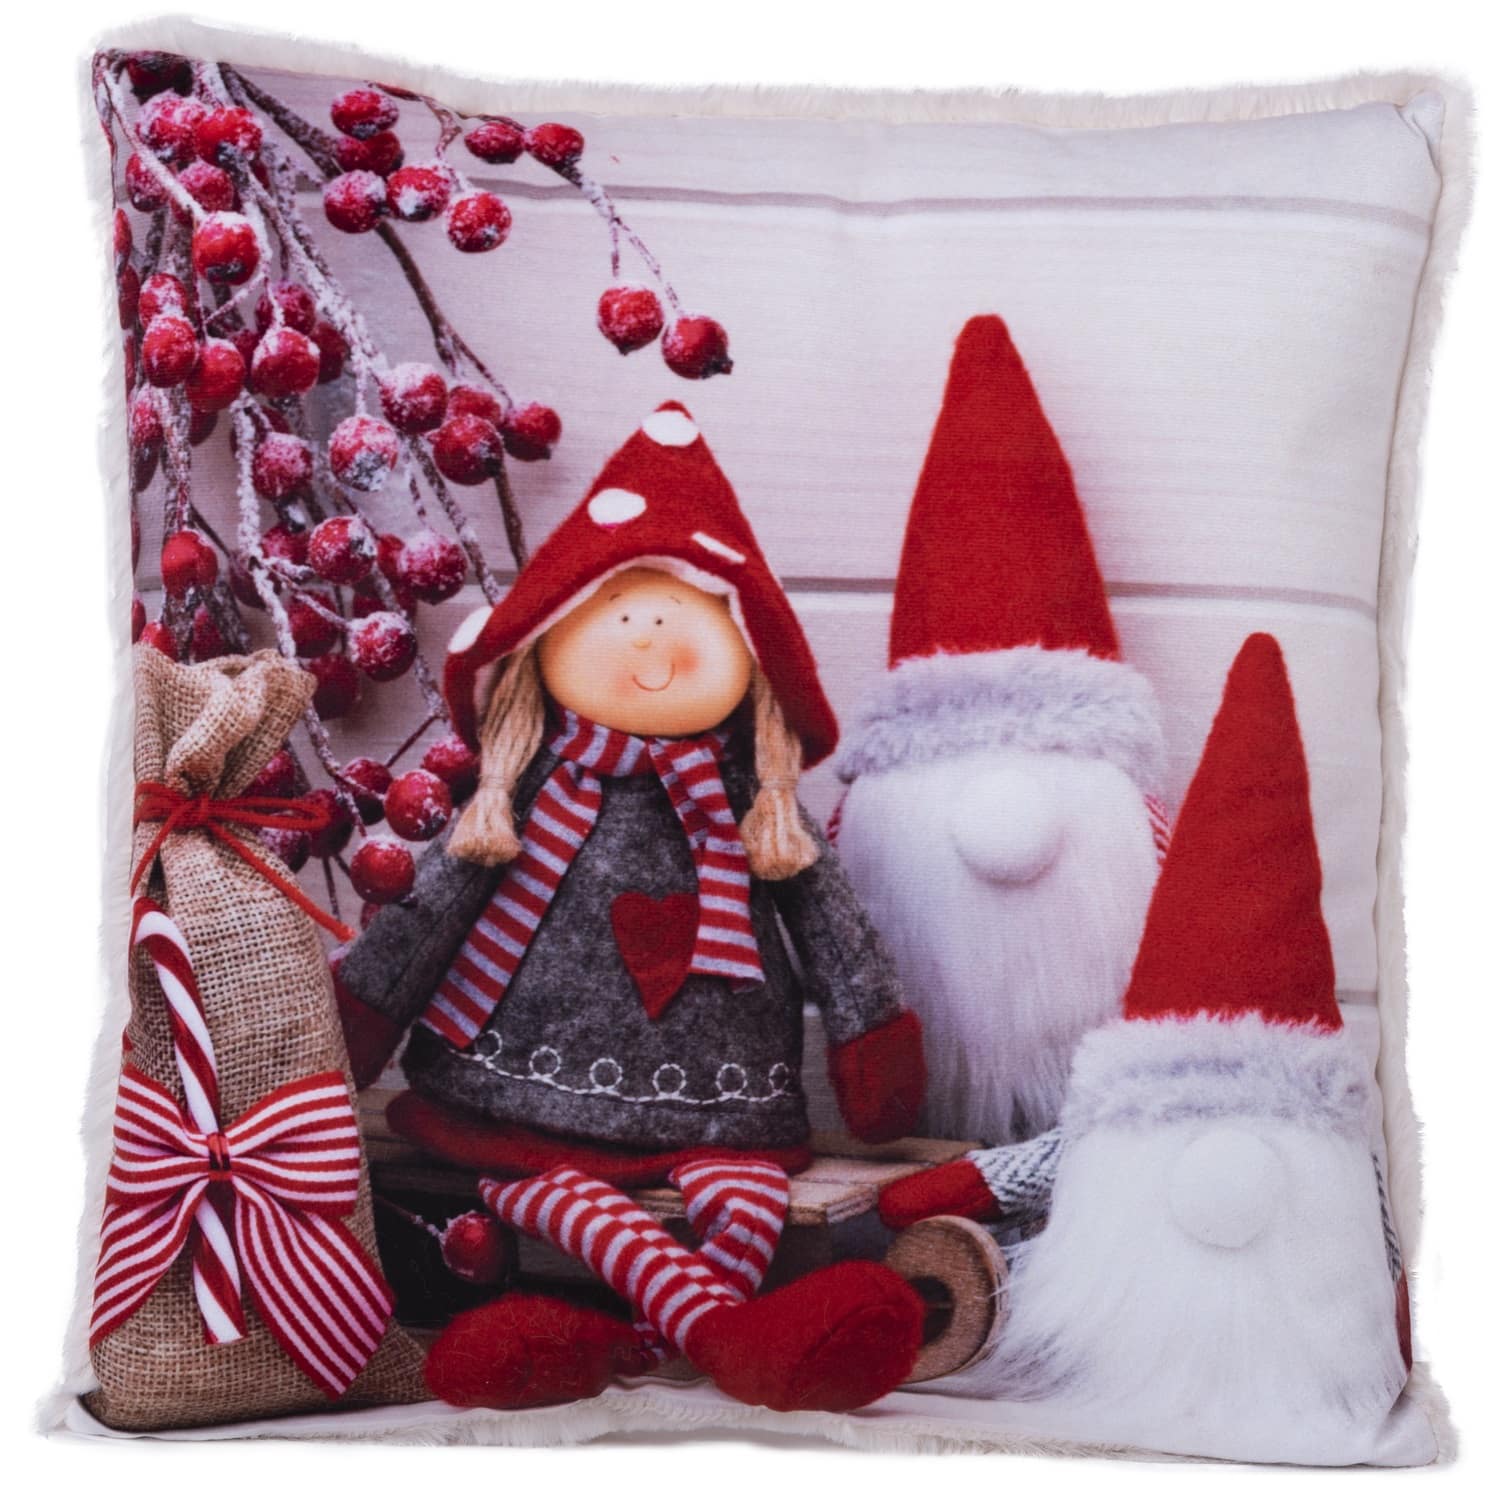 Pillow with Christmas toys